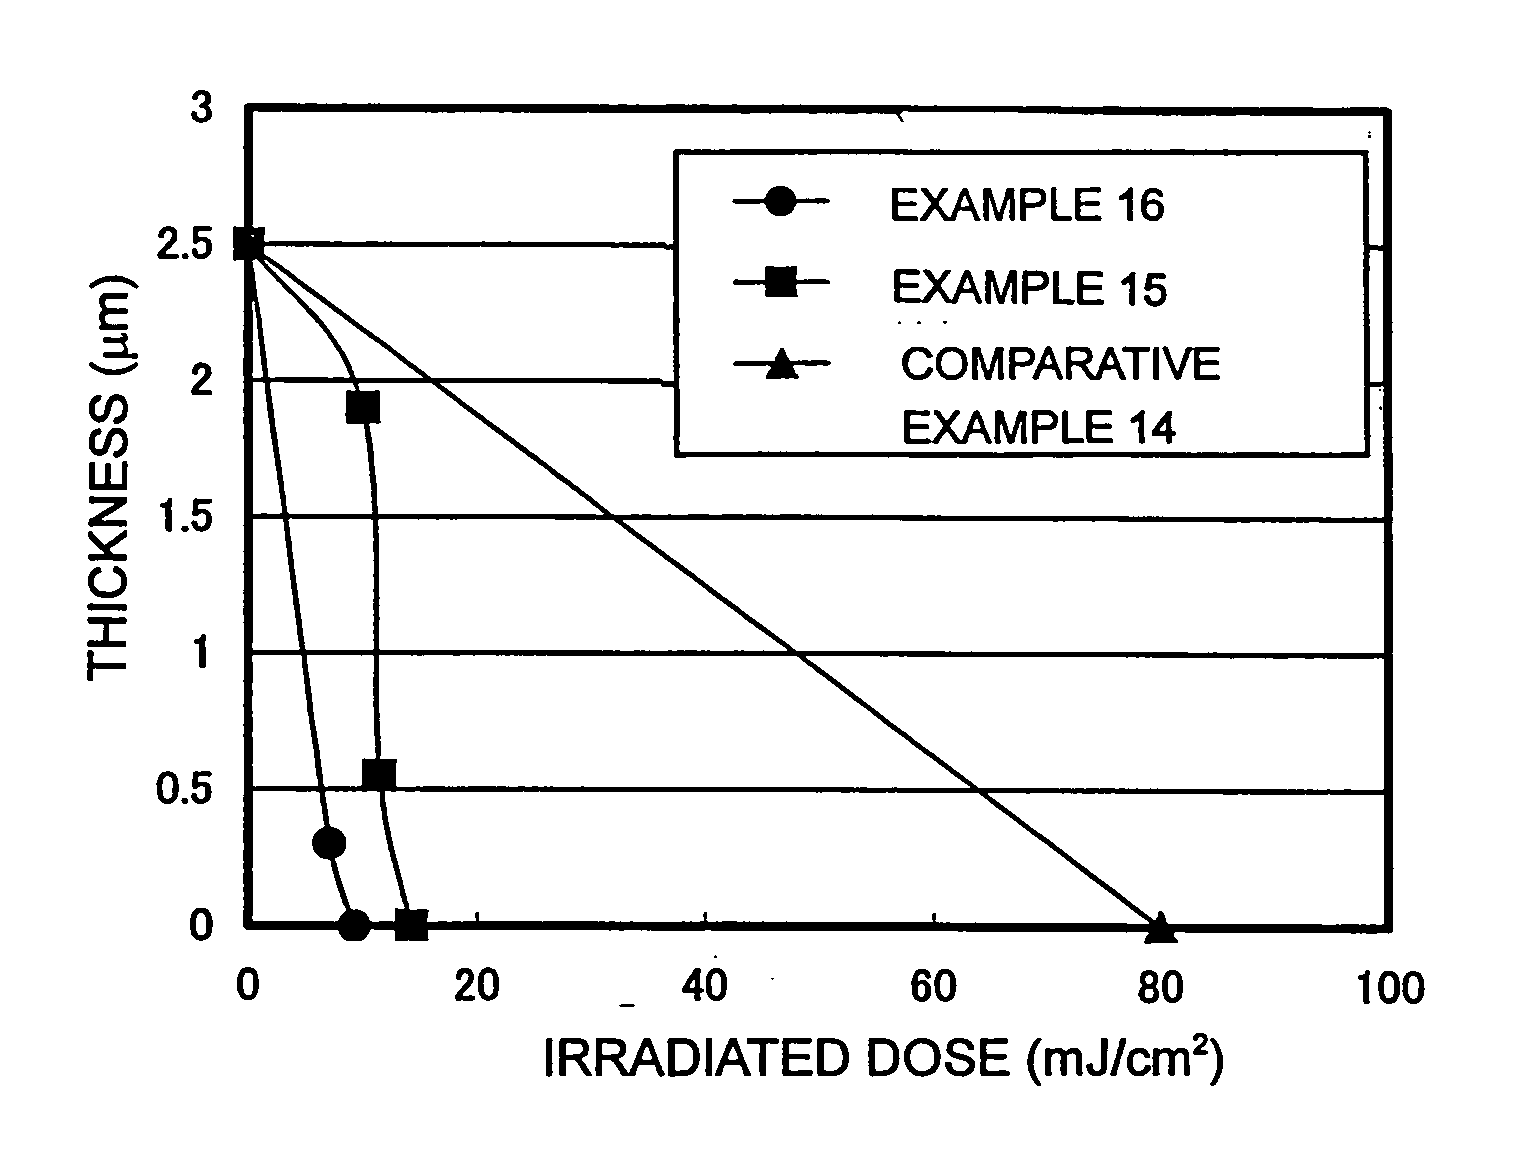 Positive-type photosensitive resin composition and cured film manufactured therefrom